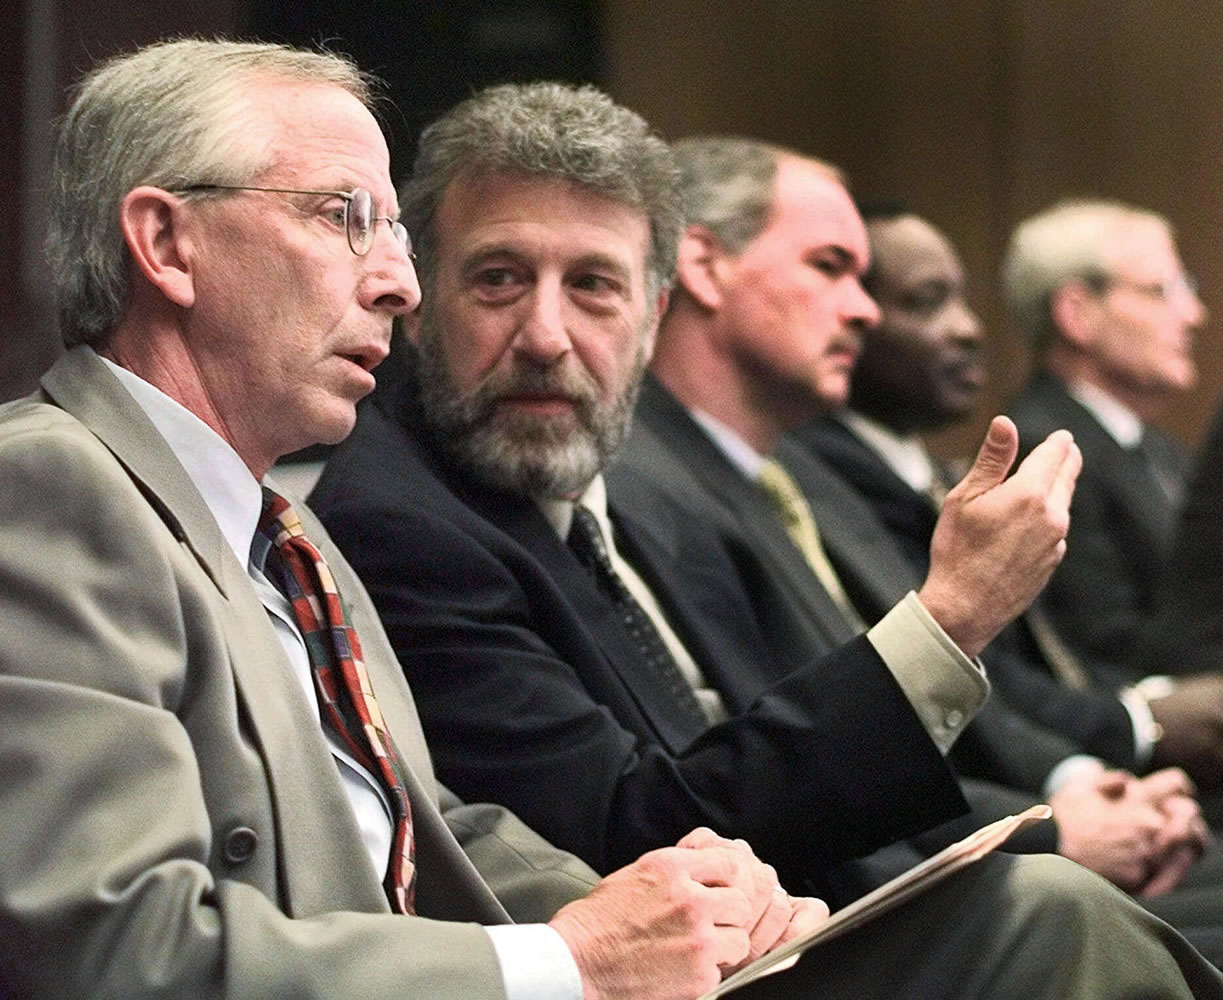 George Zimmer, center, founder of Men's Wearhouse, was fired by the company Wednesday.